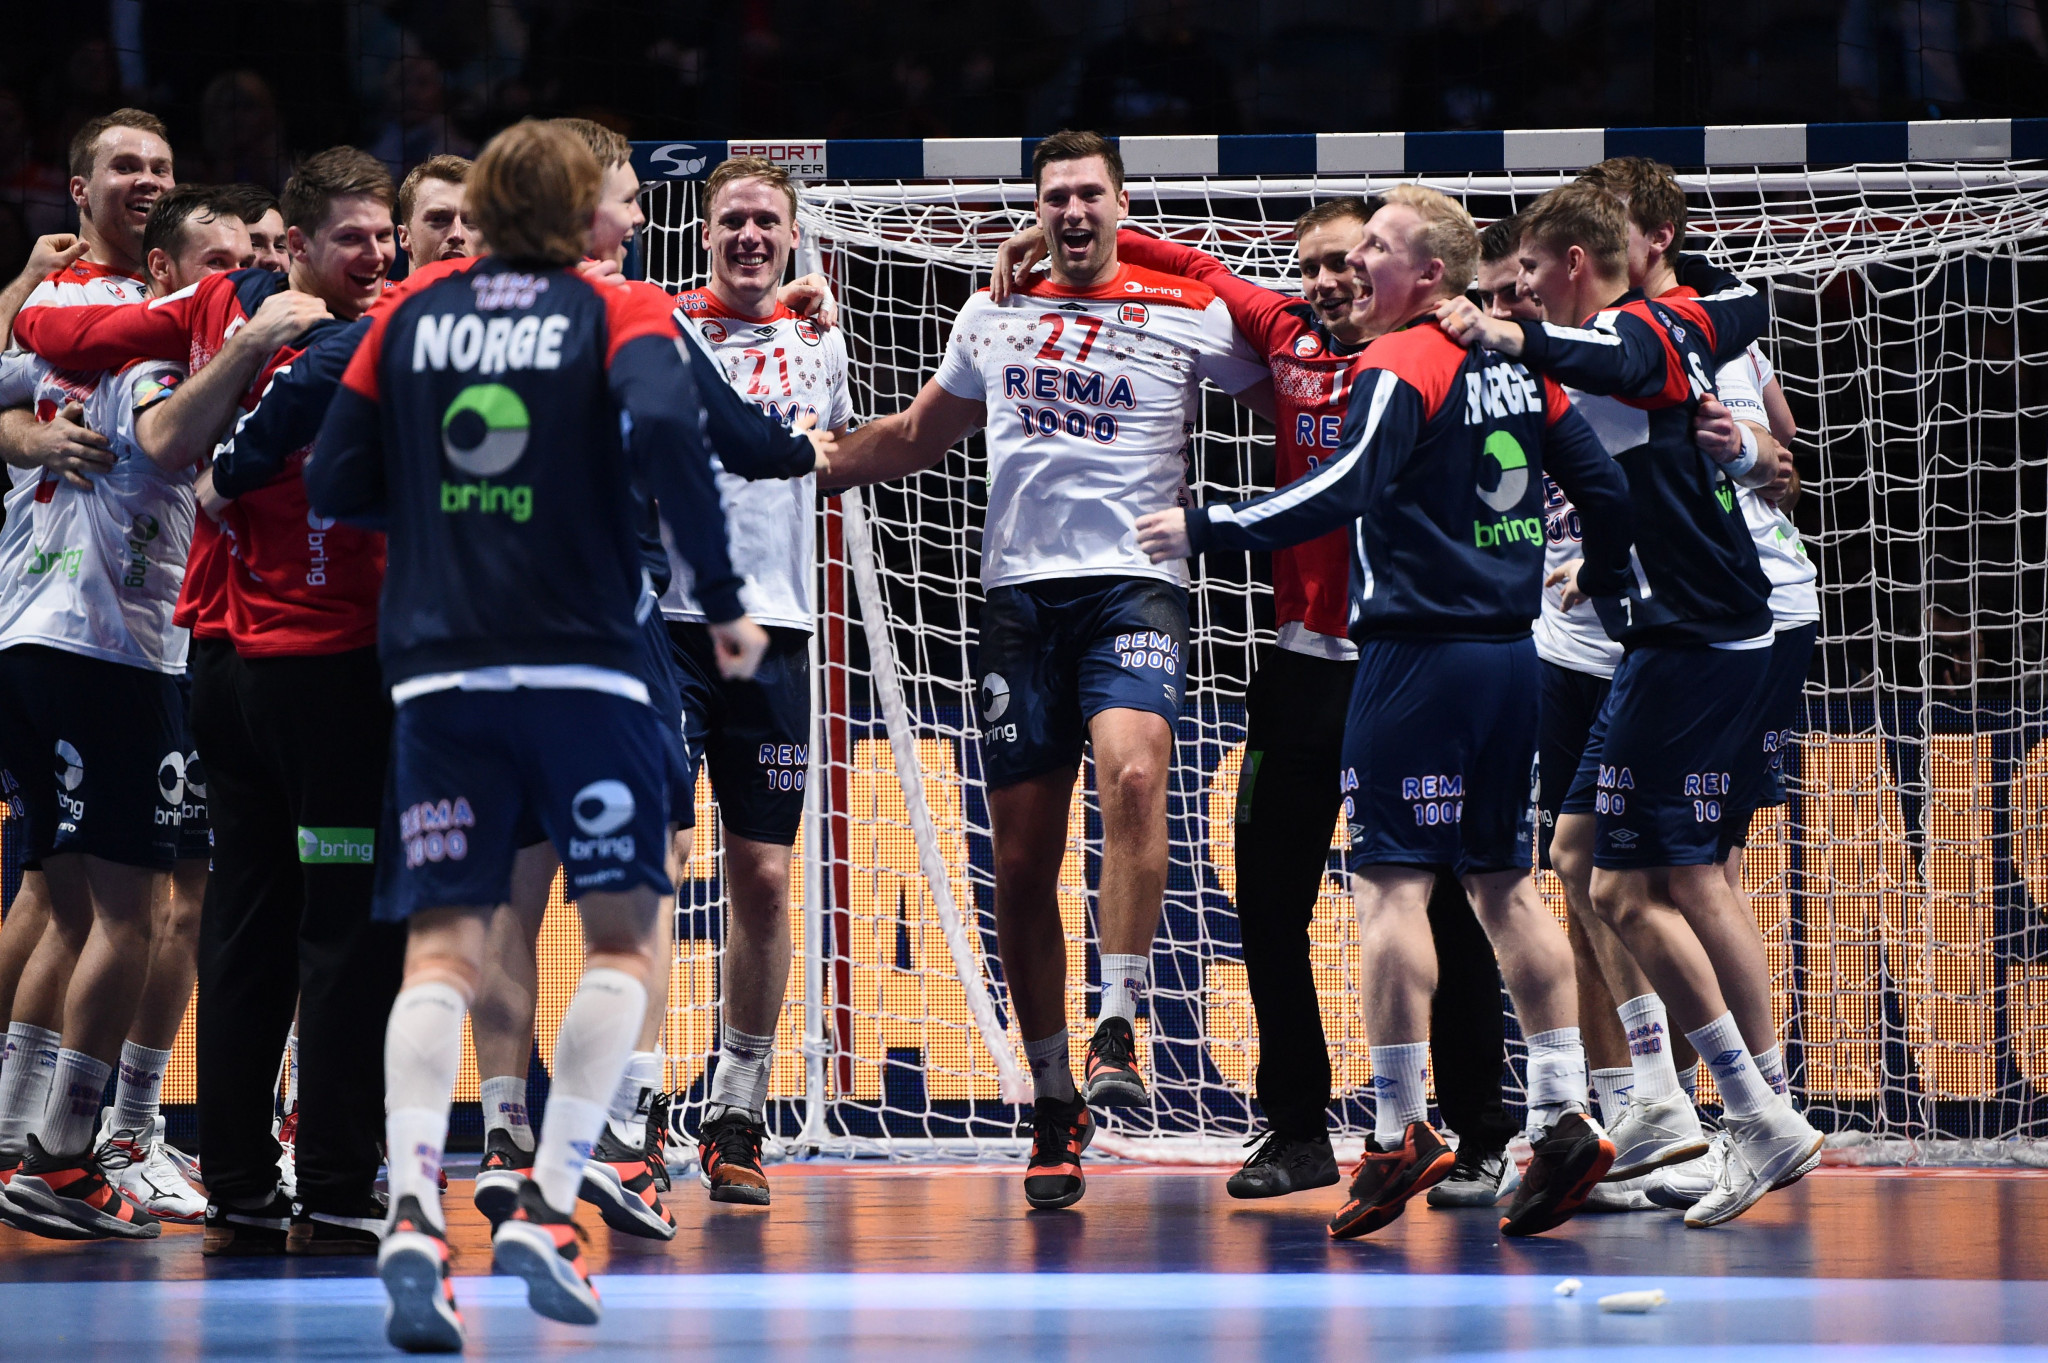 Norway celebrate after winning the Men's European Handball Championship bronze medal ©Getty Images